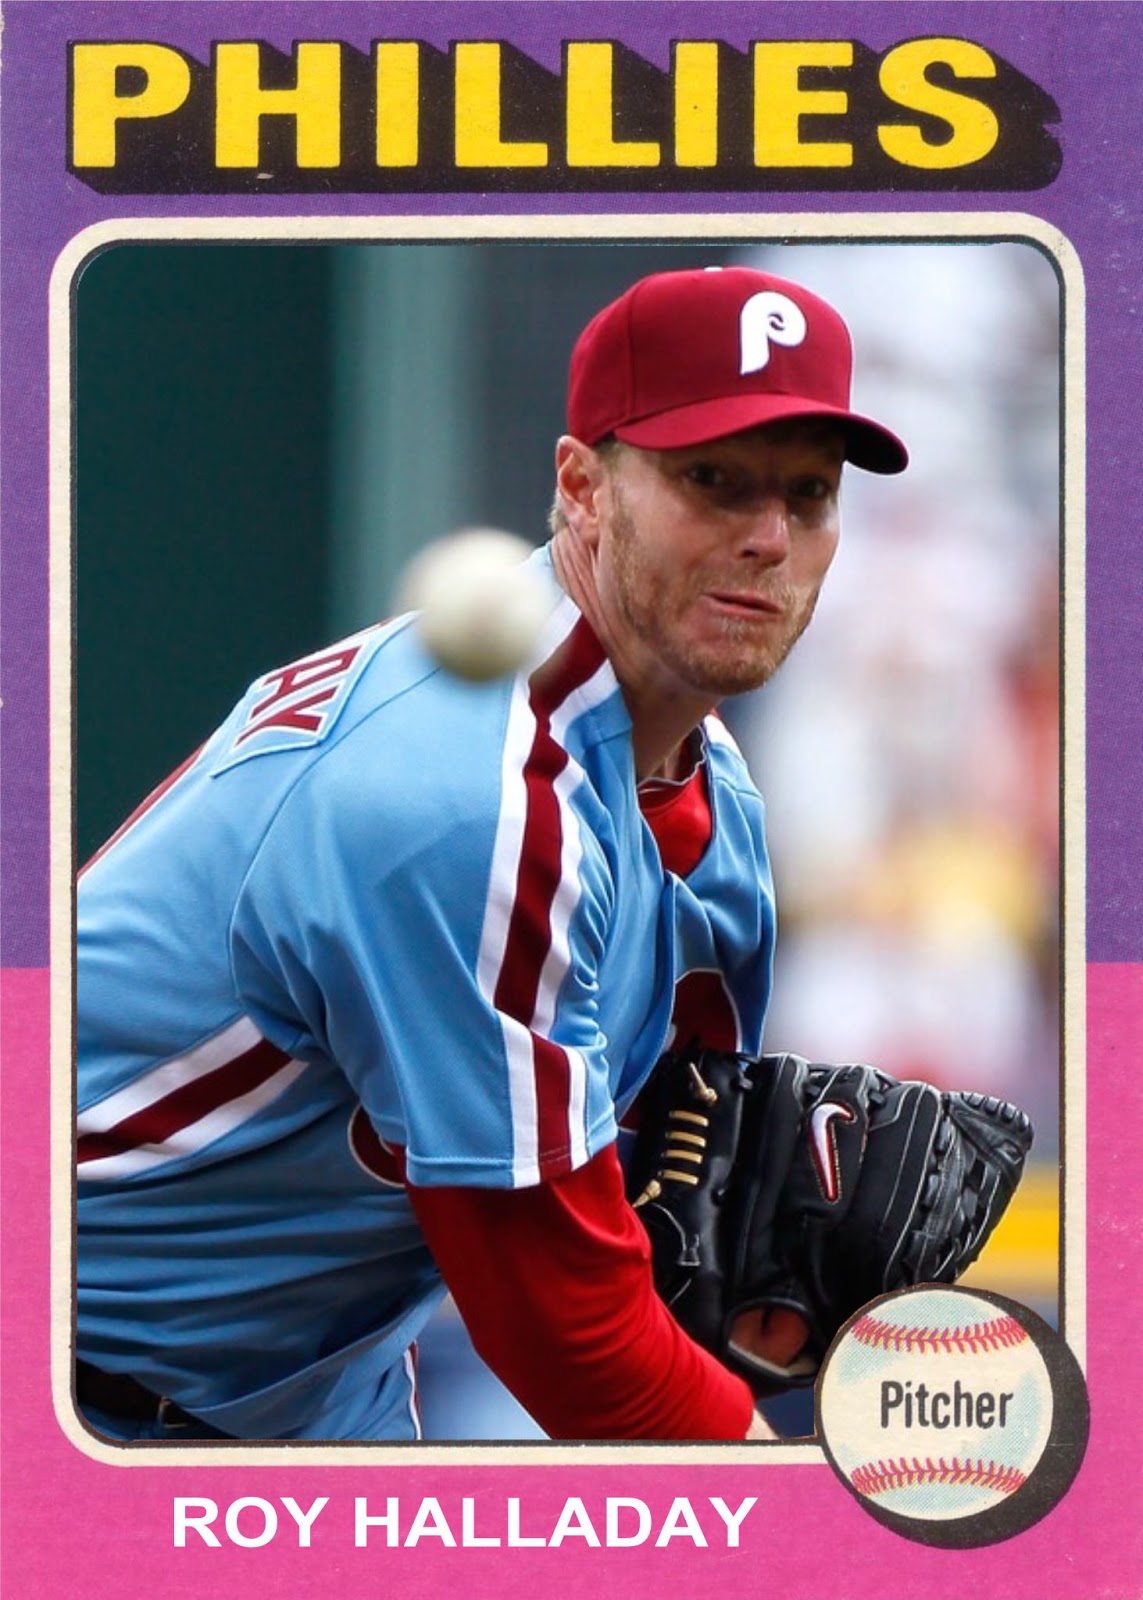 The Phillies Room: 2011 Chachi Lineage #1 Roy Halladay